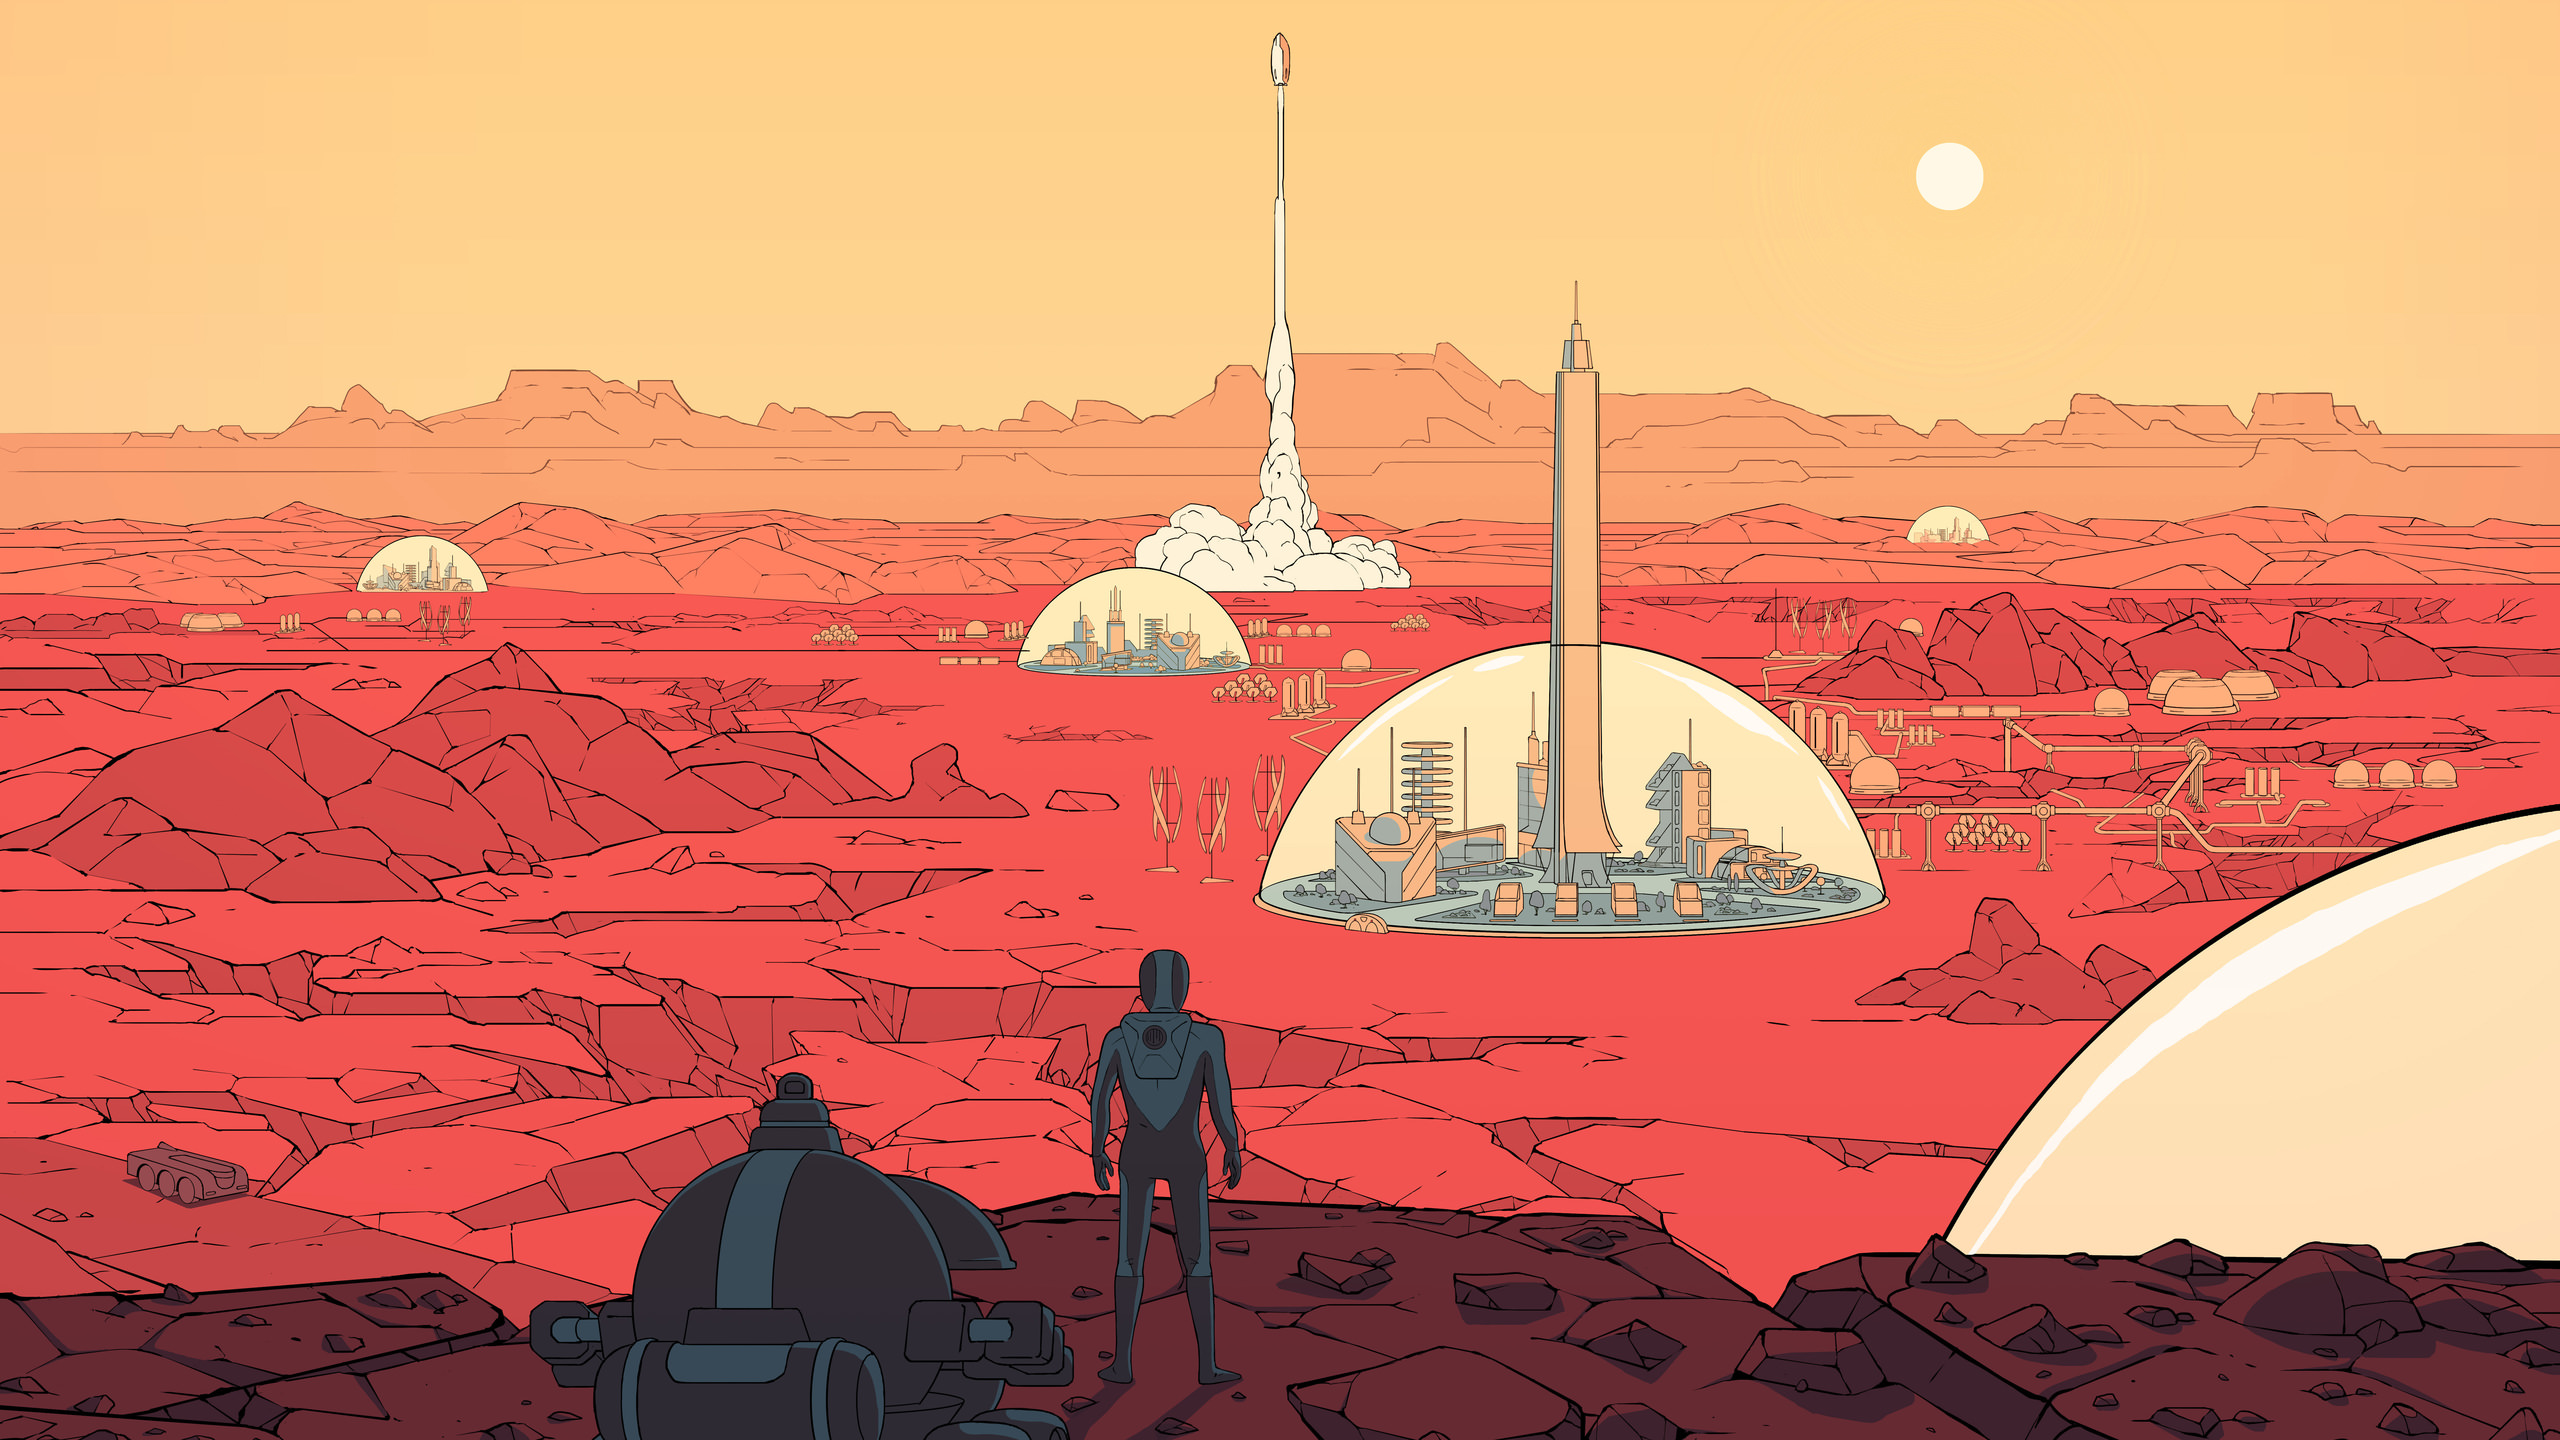 General 2560x1440 Mars artwork red planet spaceship crater surviving mars video games astronaut standing take-off